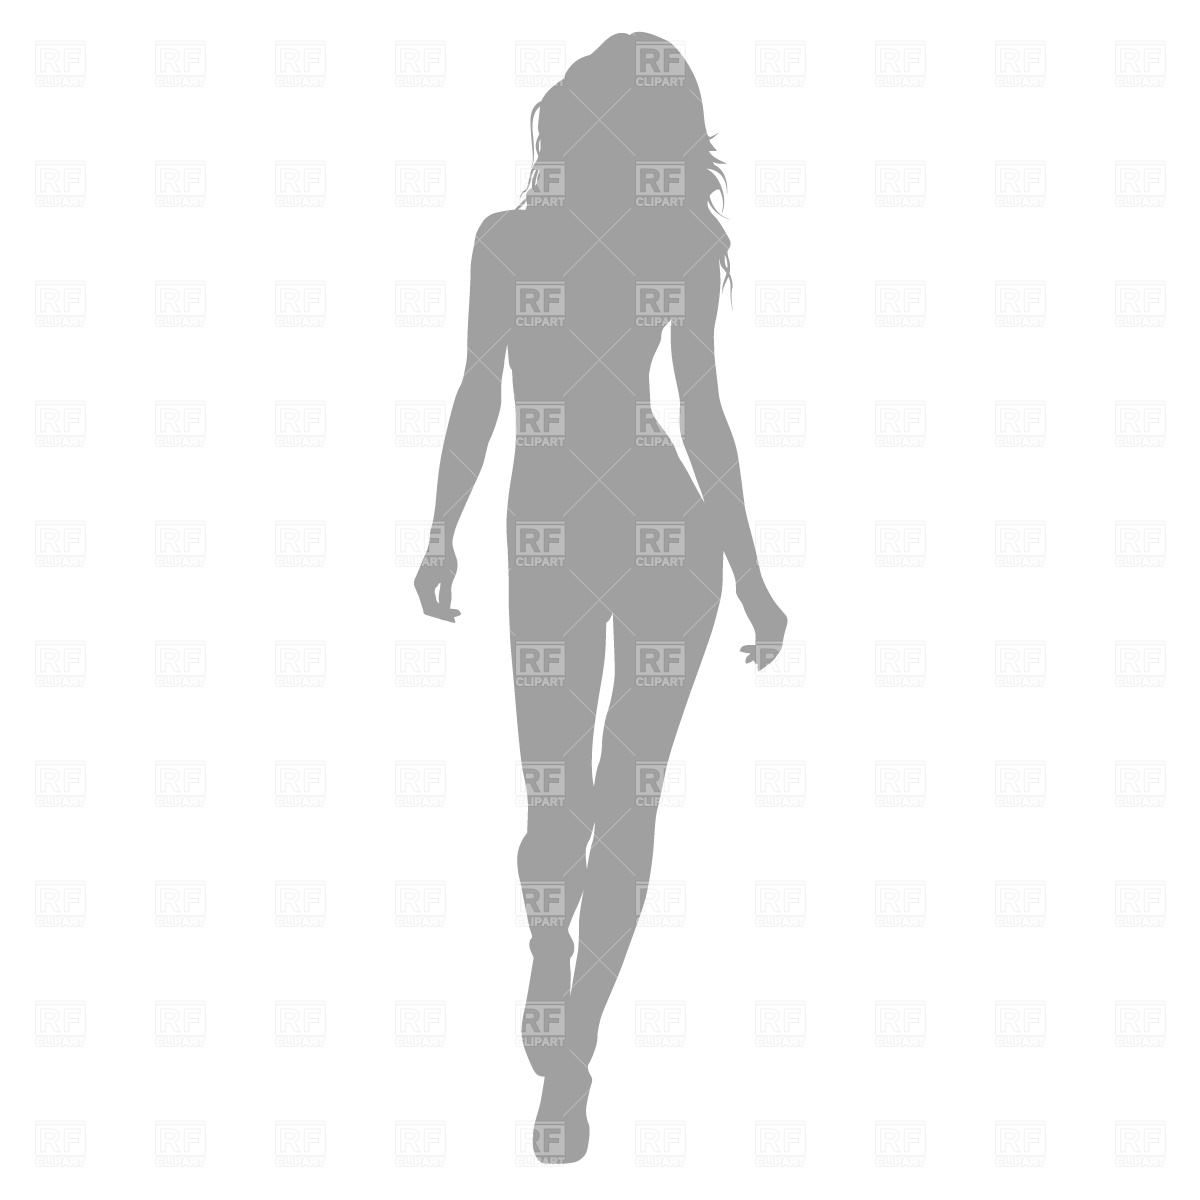 Catwalk Model Silhouette Download Royalty Free Vector Clipart  Eps